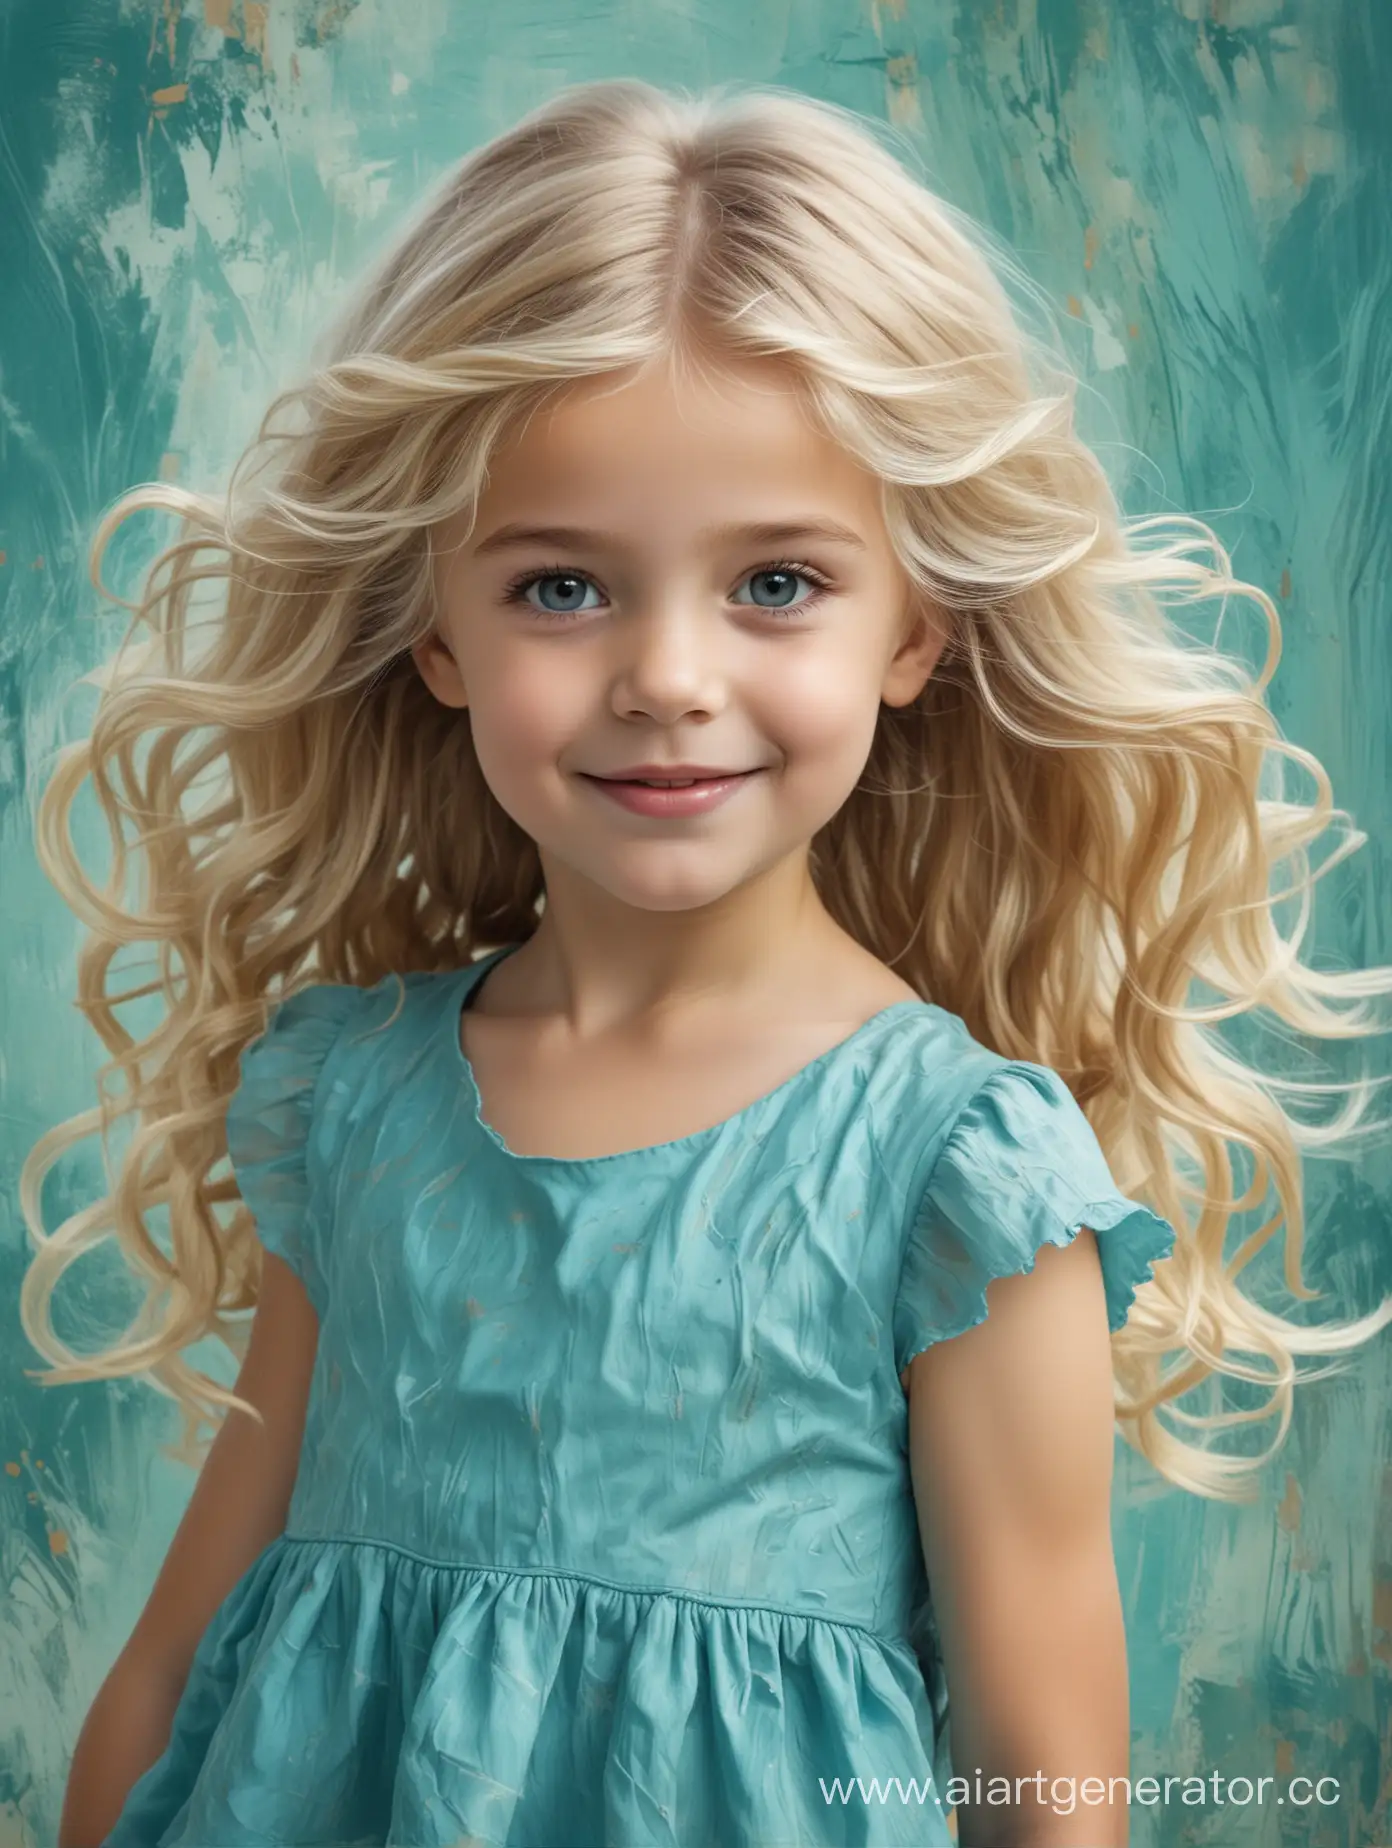 Blonde-Child-in-Blue-Dress-with-Wavy-Hairstyle-on-Turquoise-Brush-Stroke-Background